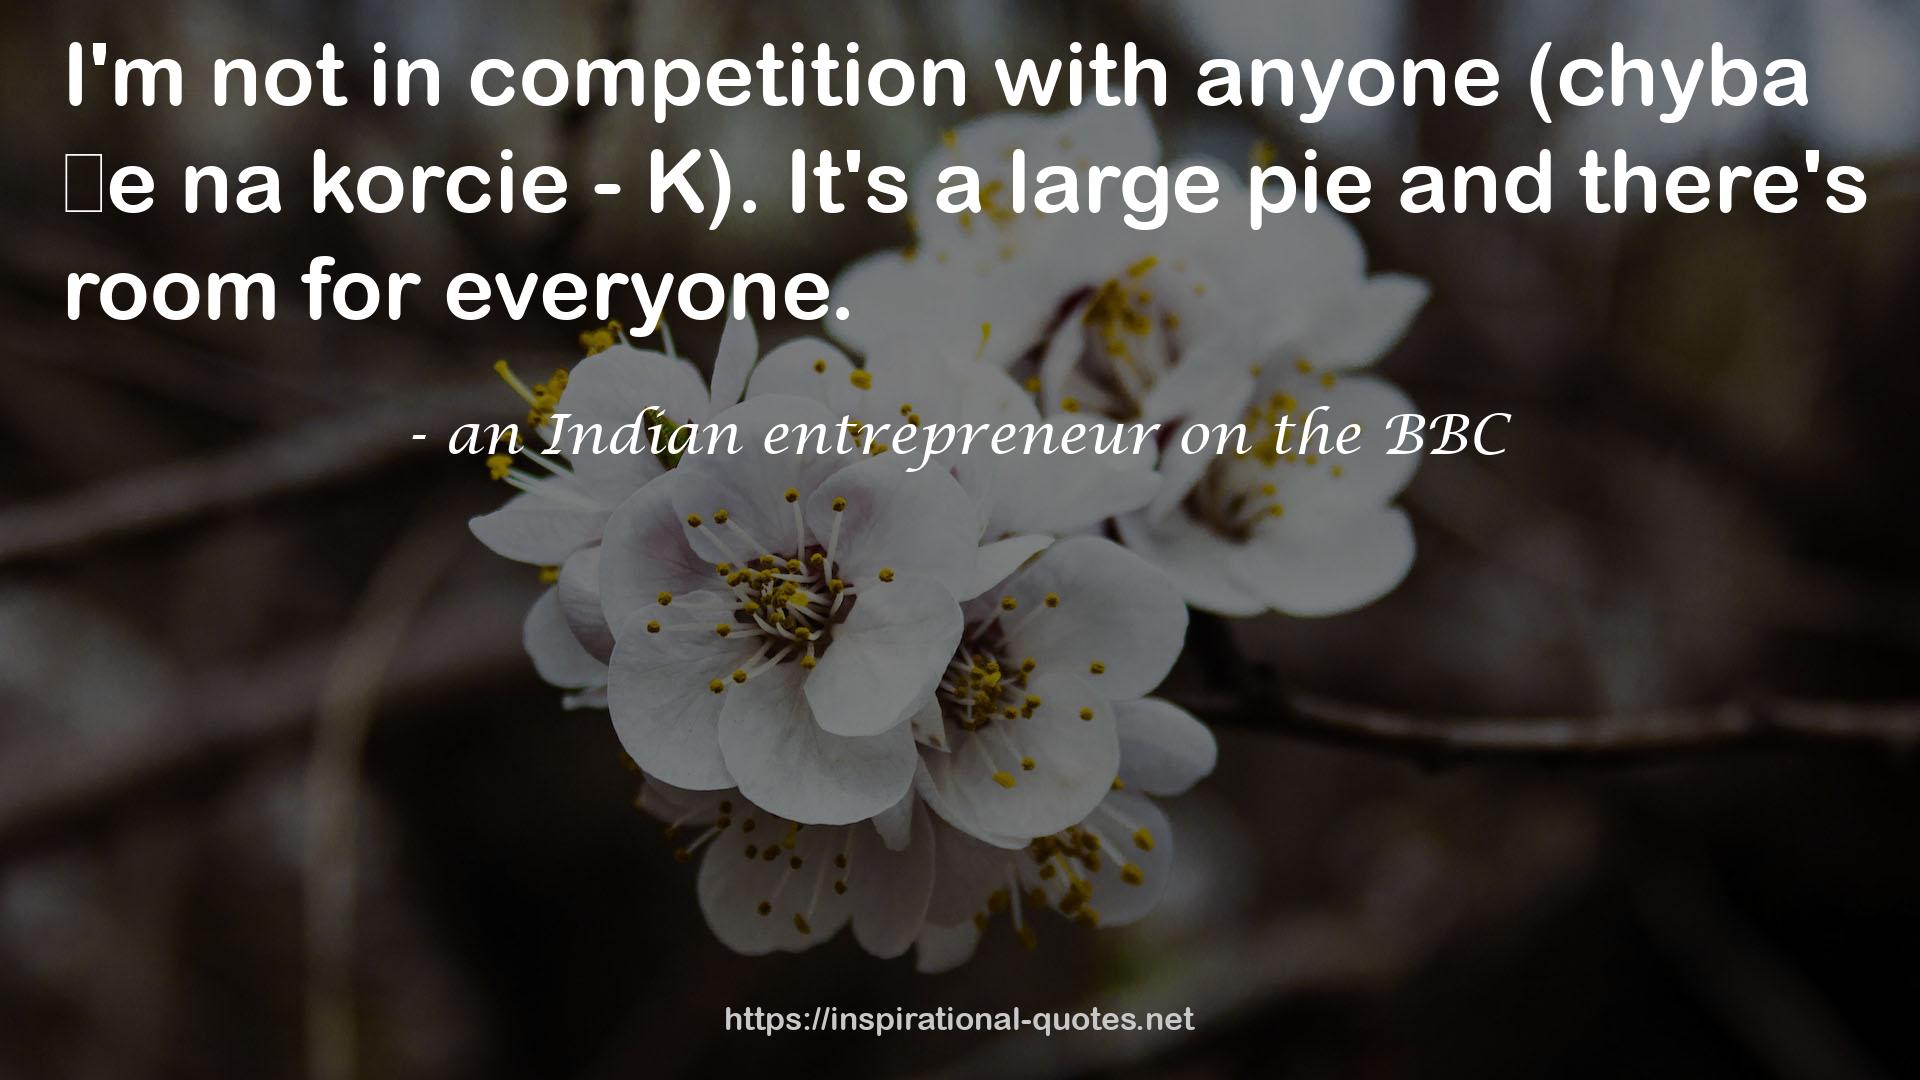 an Indian entrepreneur on the BBC QUOTES